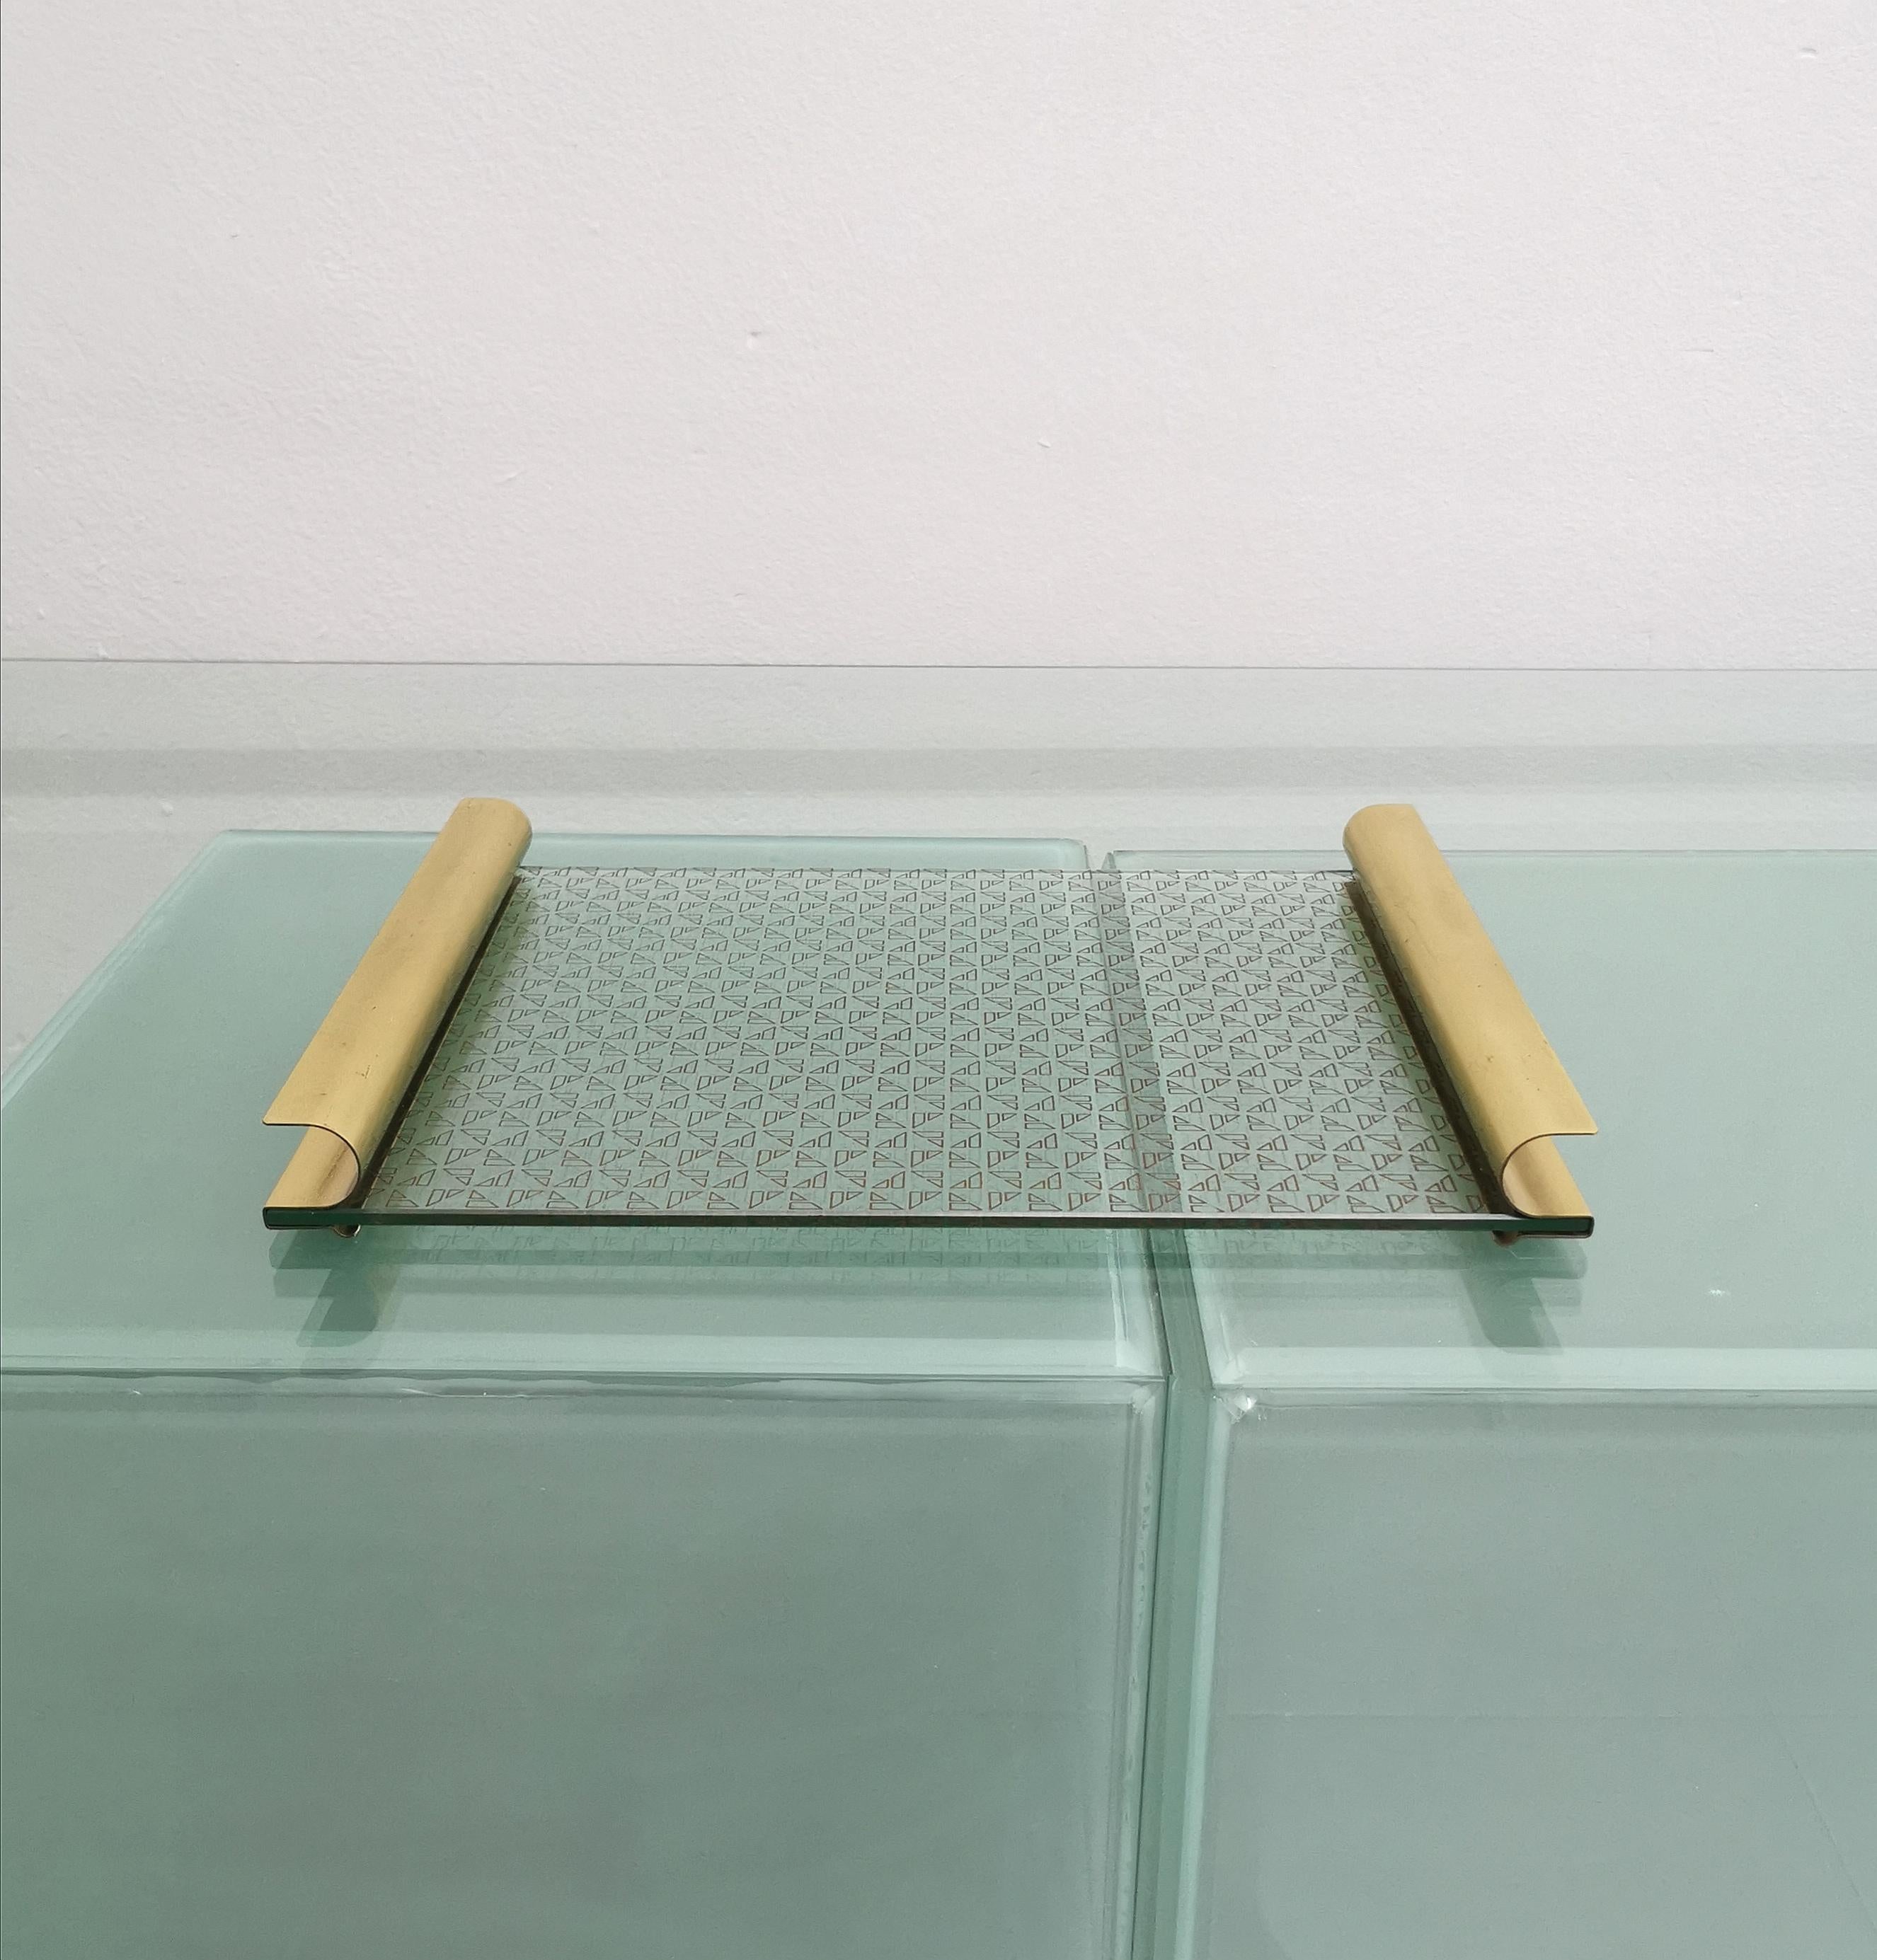 Midcentury Brass Tray Tables Glass Rectangular Italian Design 1970s Set of 2 In Good Condition For Sale In Palermo, IT